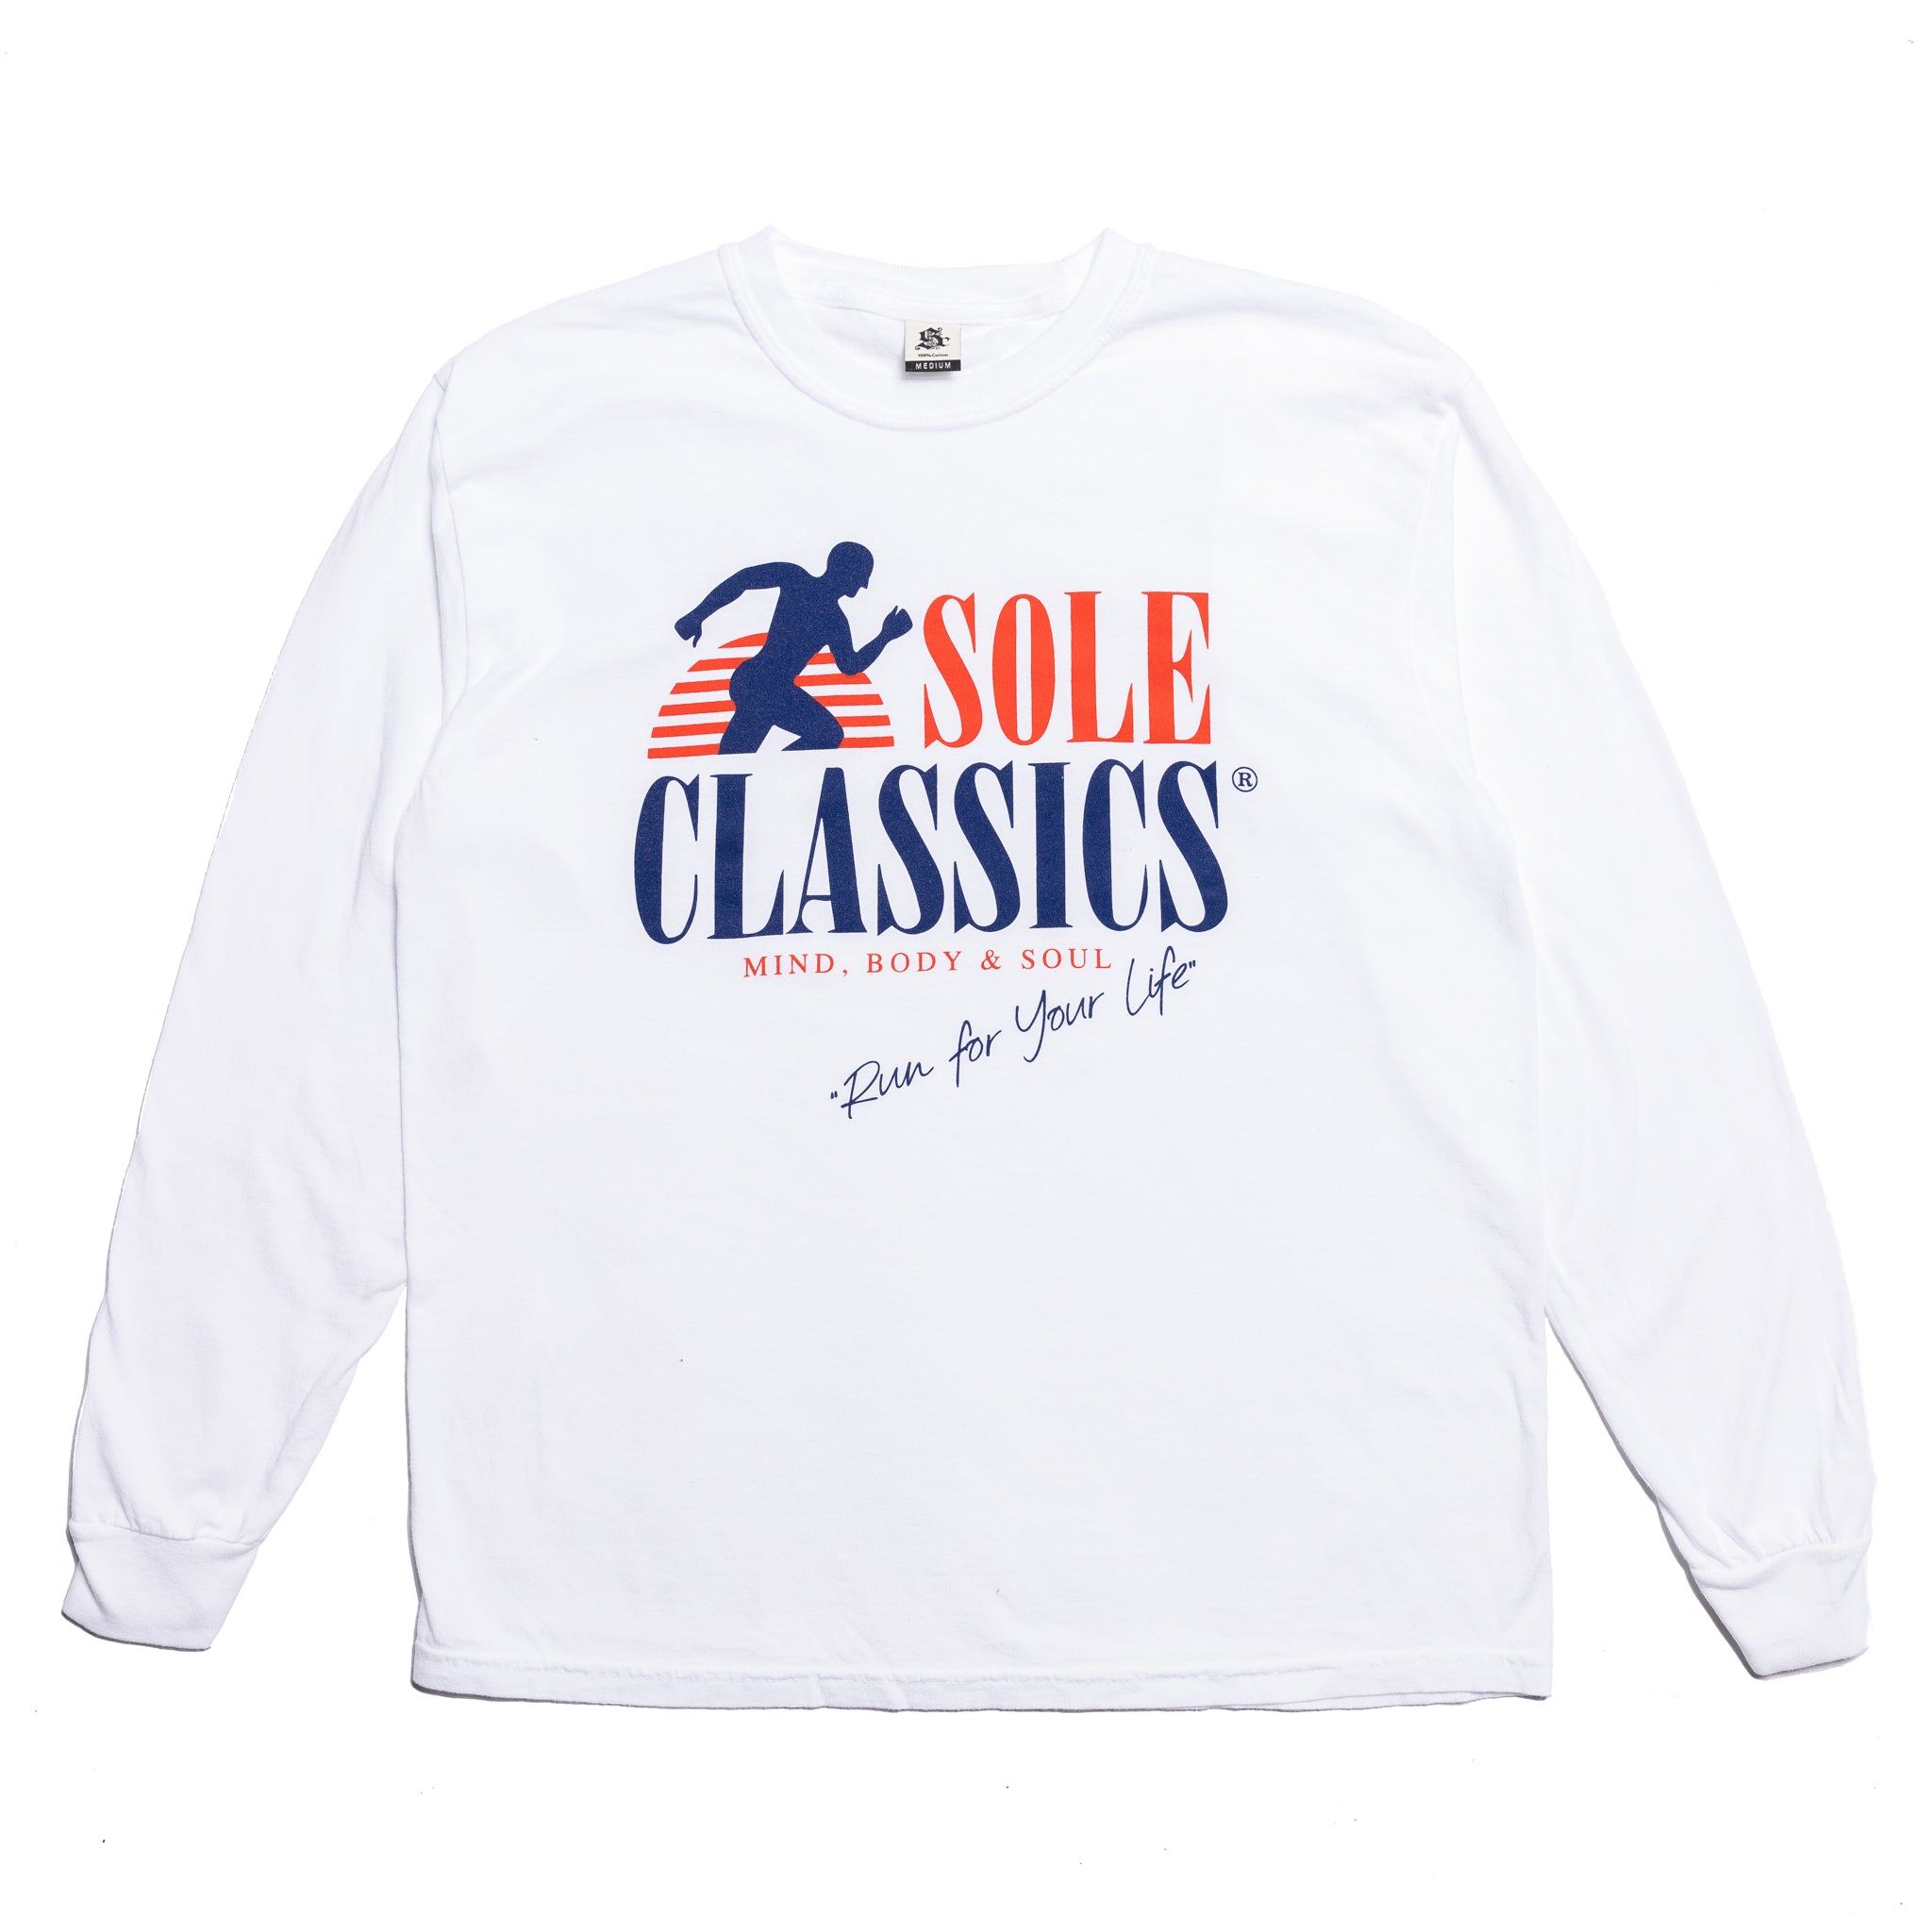 Sole Classics Run For Your Life LS Tee in White